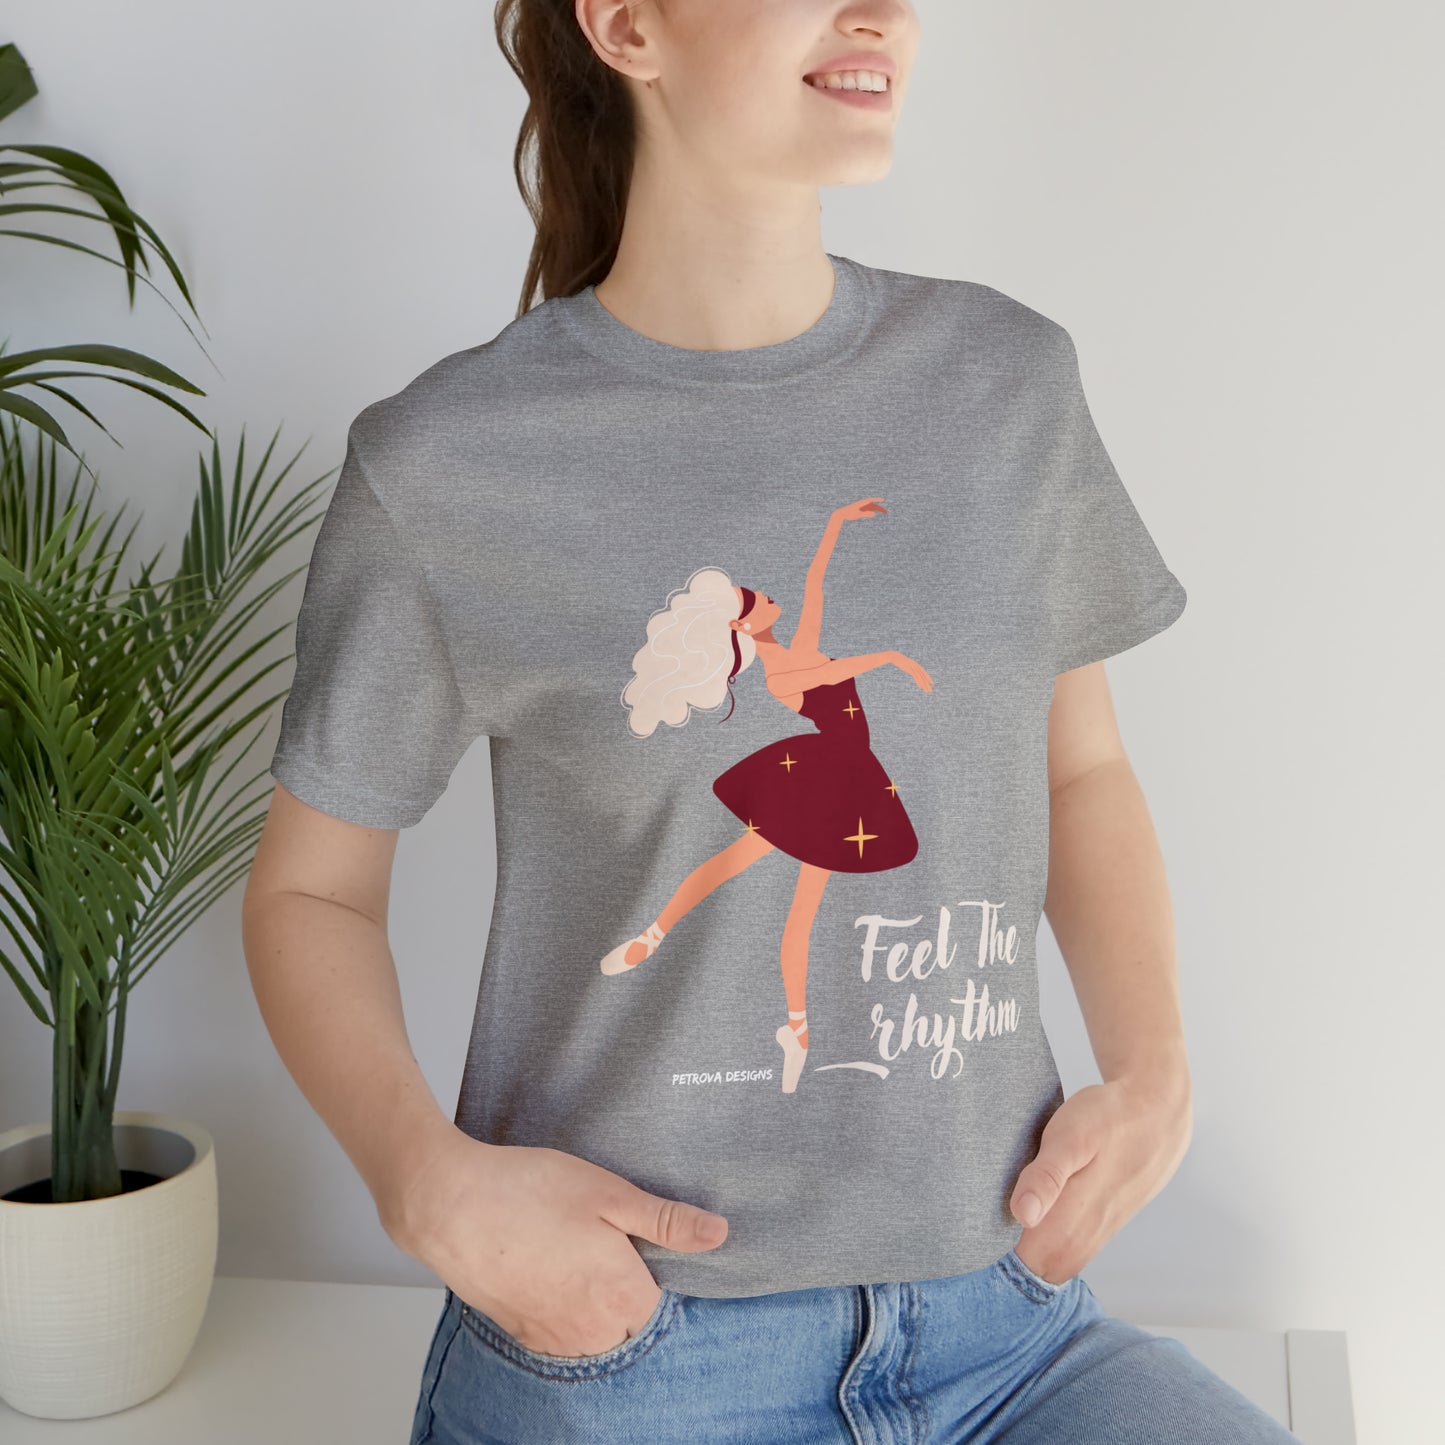 Athletic Heather T-Shirt Tshirt Design Gift for Friend and Family Short Sleeved Shirt Petrova Designs